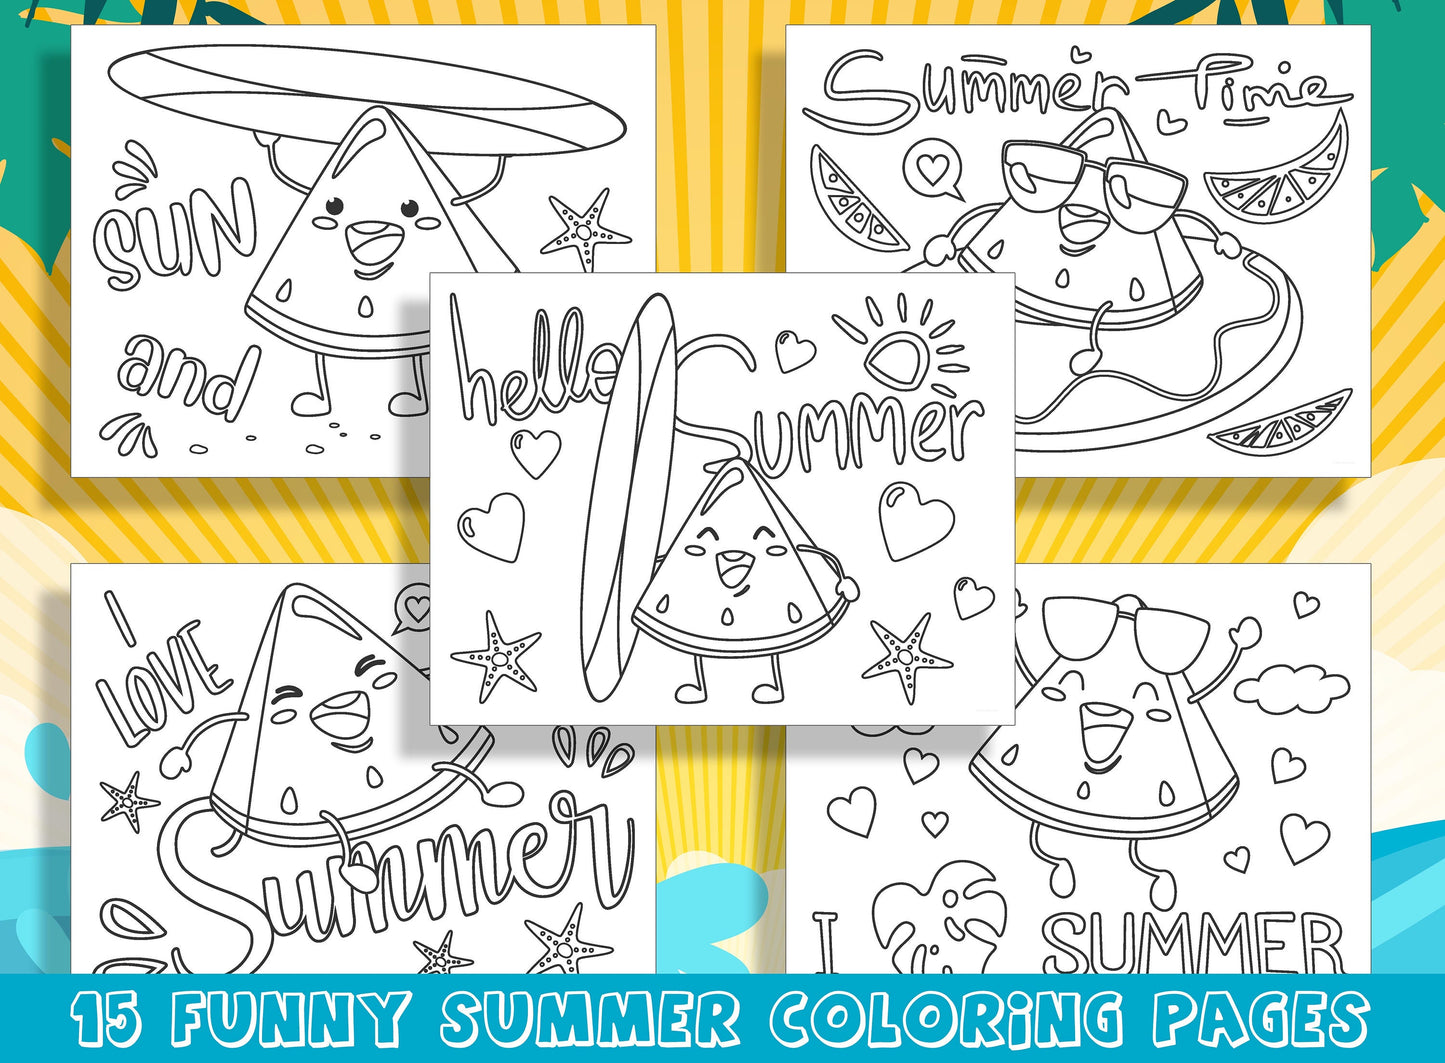 Sun, Sand, and Scribbles: 15 Funny and Cute Summer Coloring Pages, PDF File, Instant Download